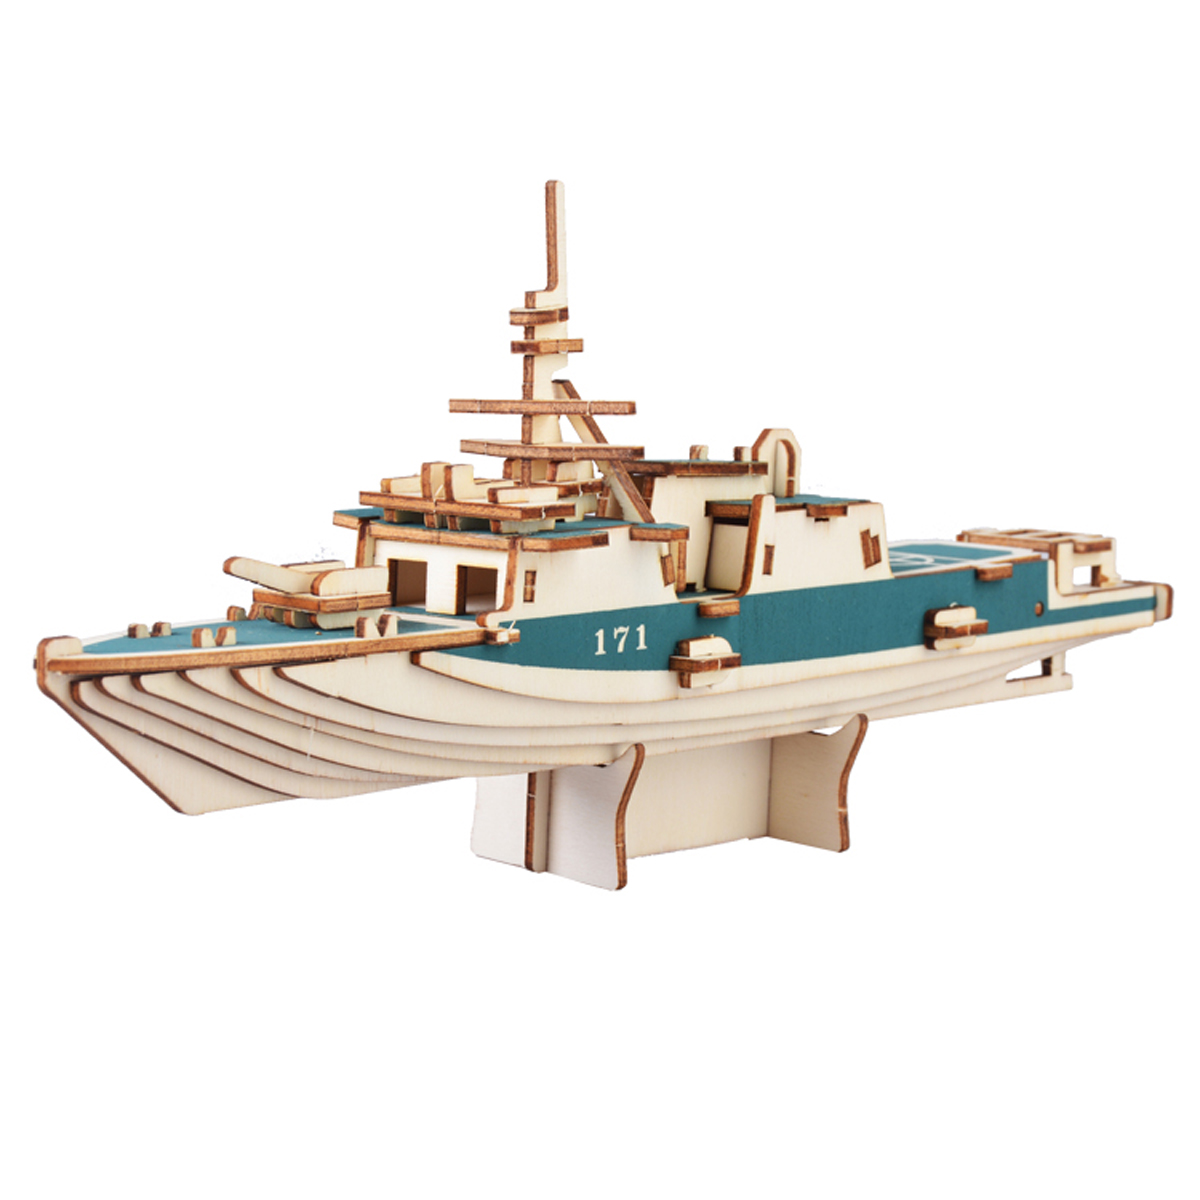 3D-Woodcraft-Assembly-Battleship-Series-Kit-Jigsaw-Puzzle-Toy-Decoration-Model-for-Kids-Gift-1632733-5